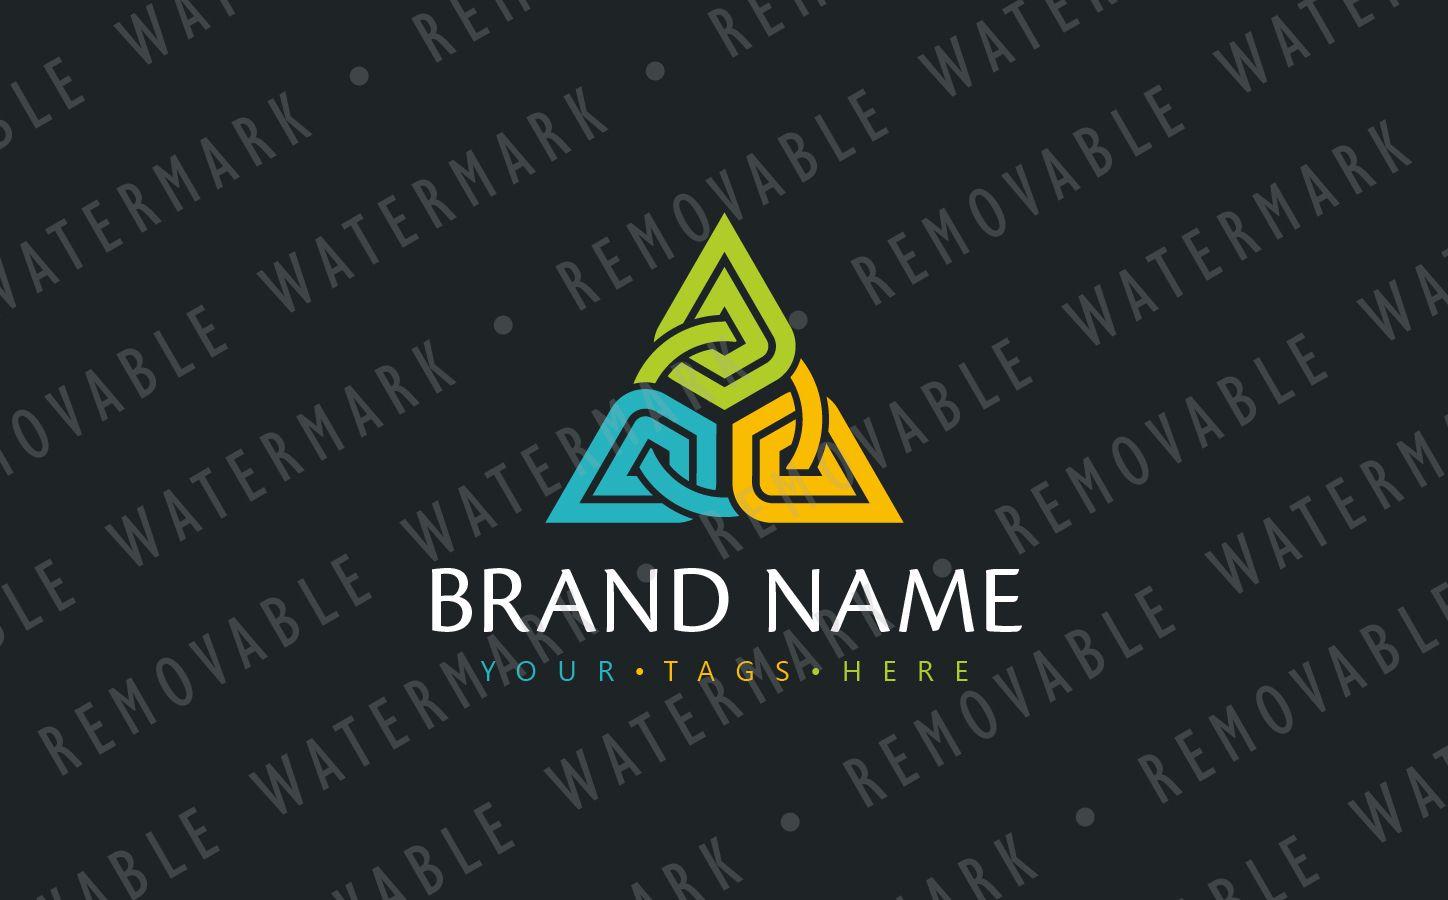 Gray Triangle Logo - Abstract Chained Triangle Logo Template